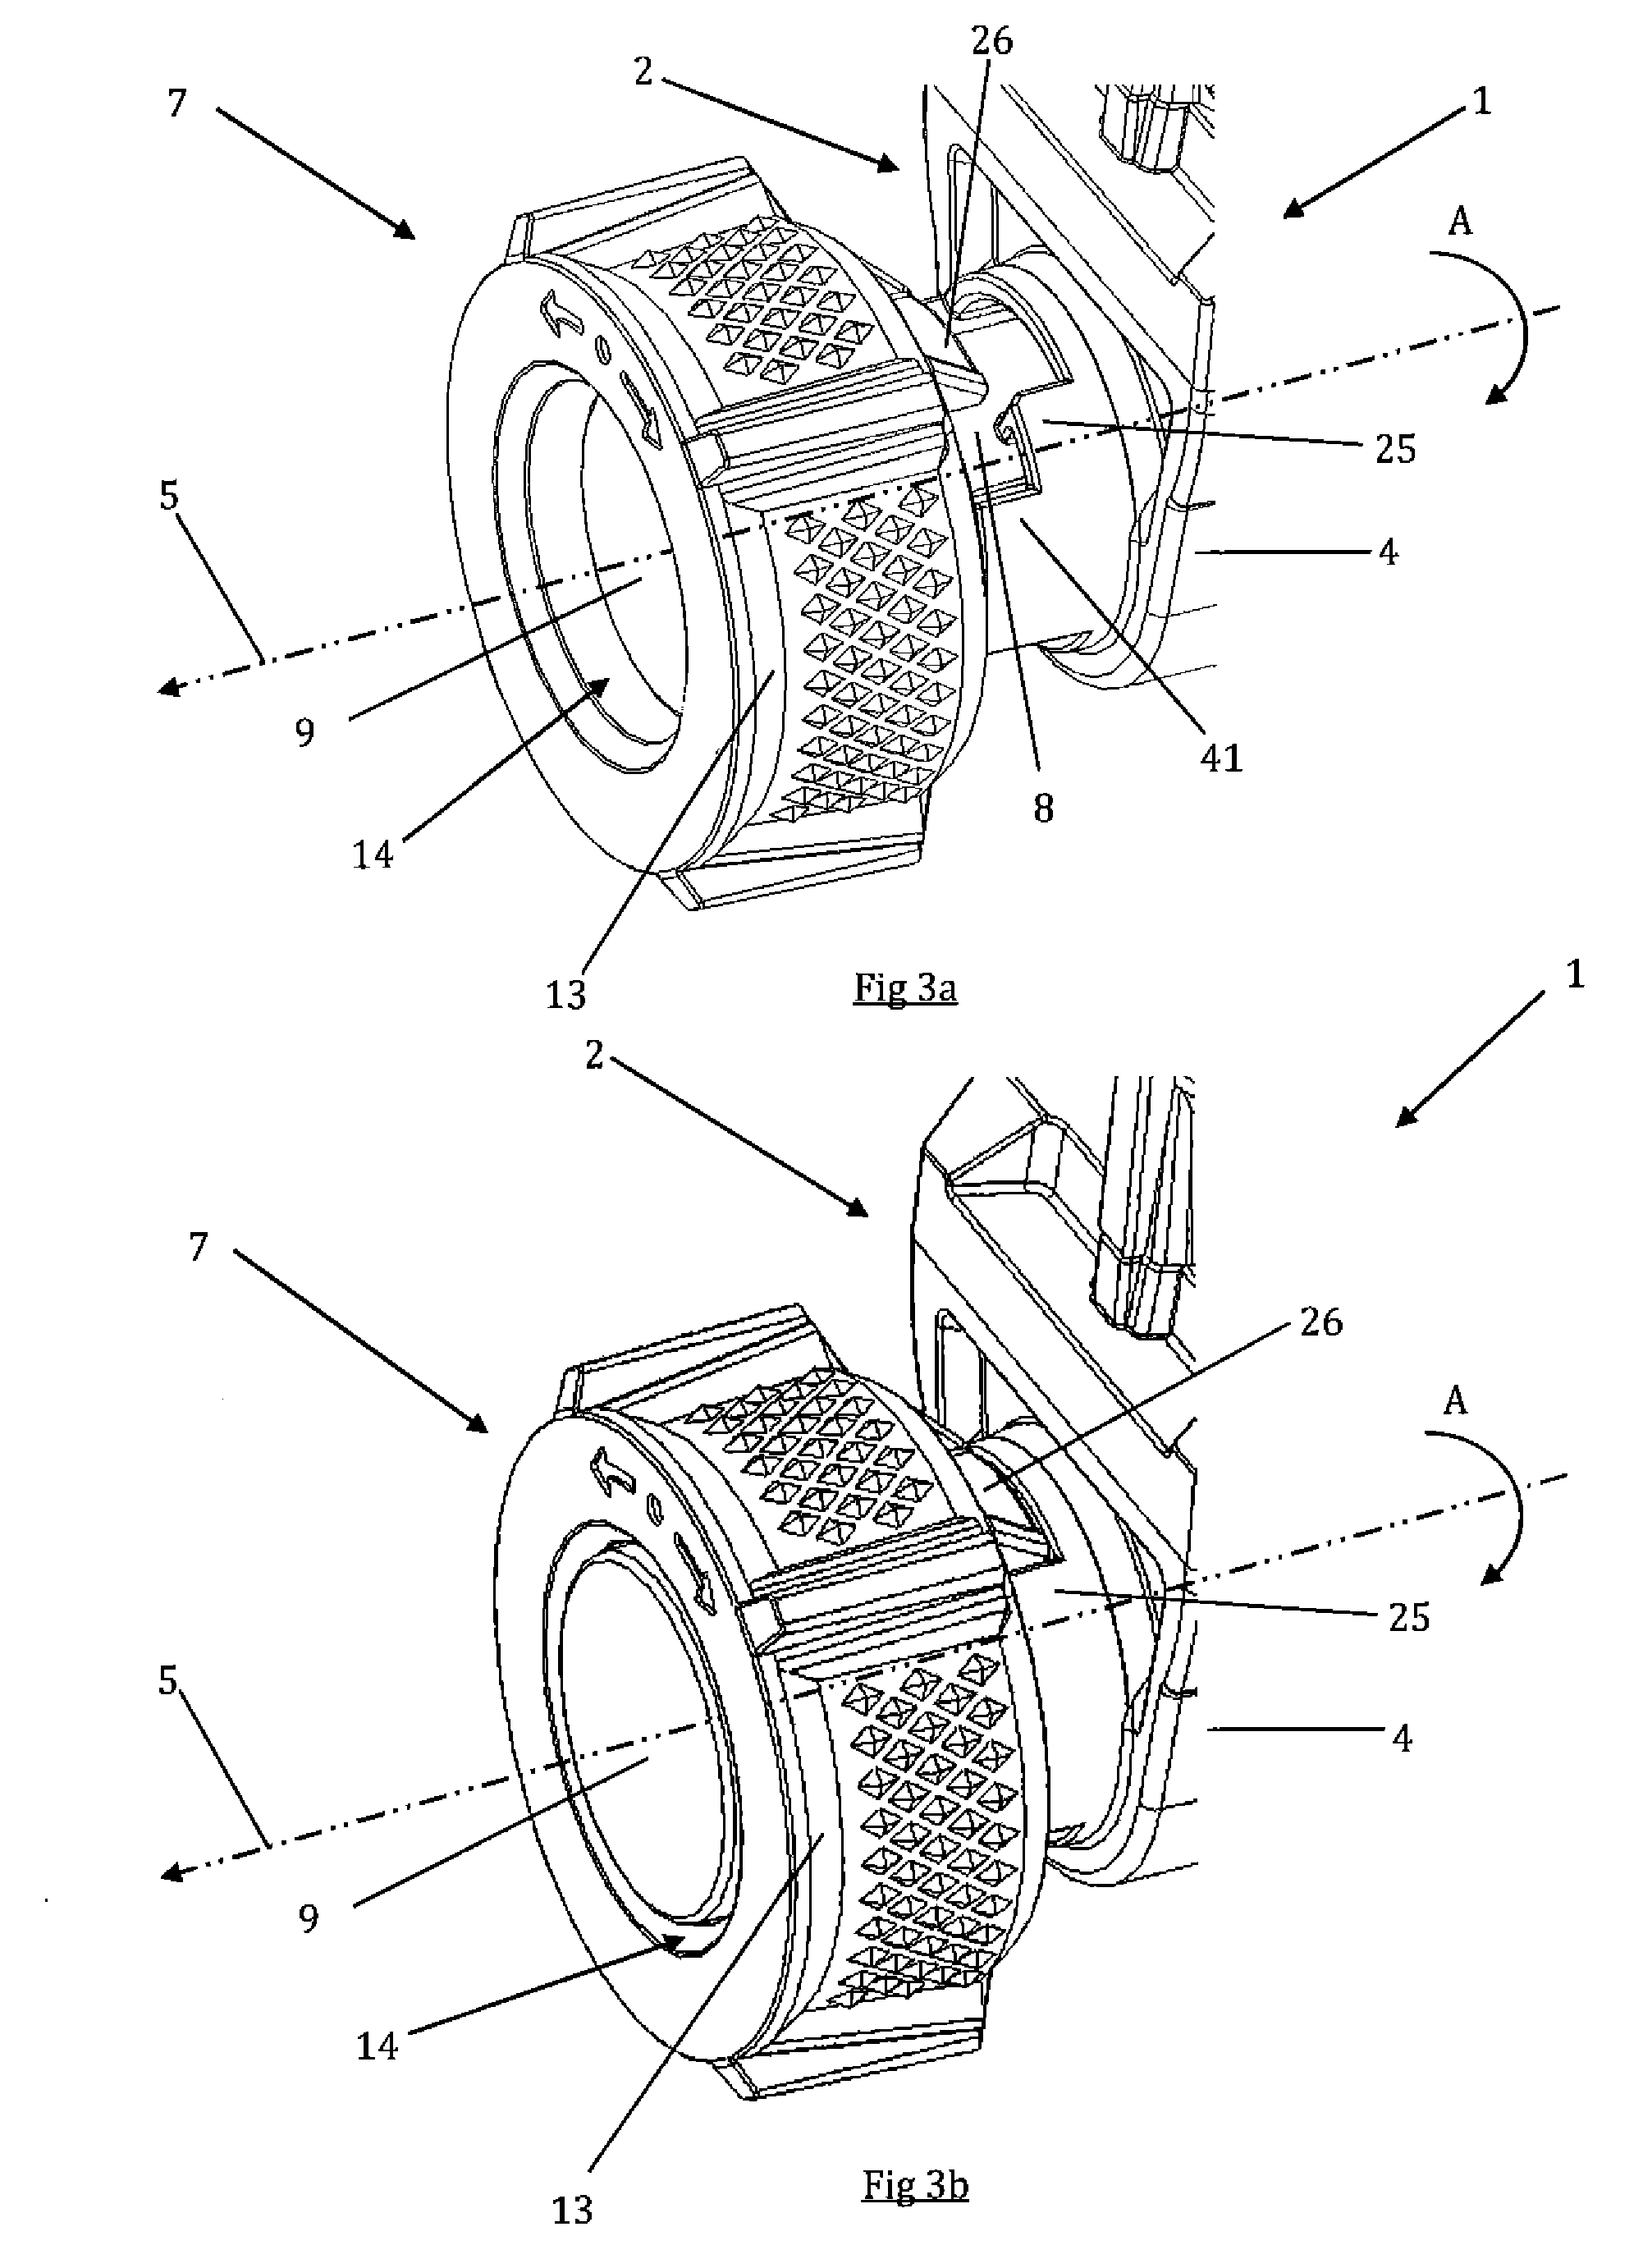 Portable electric lamp with a compact casing housing a lighting module controlled by a rotary actuator